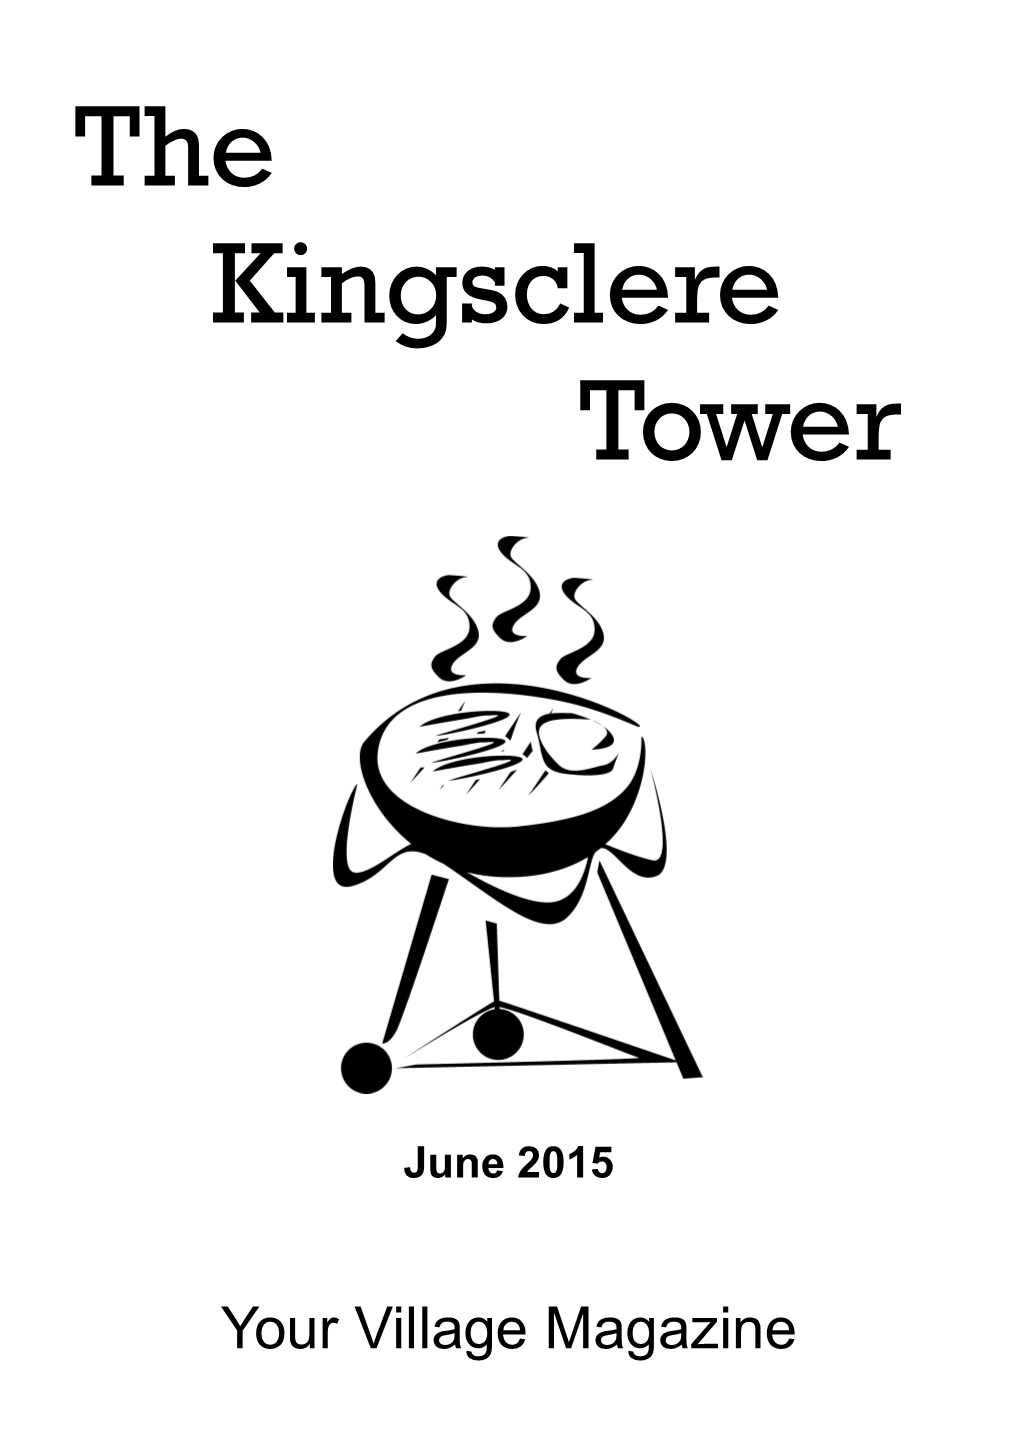 The Kingsclere Tower